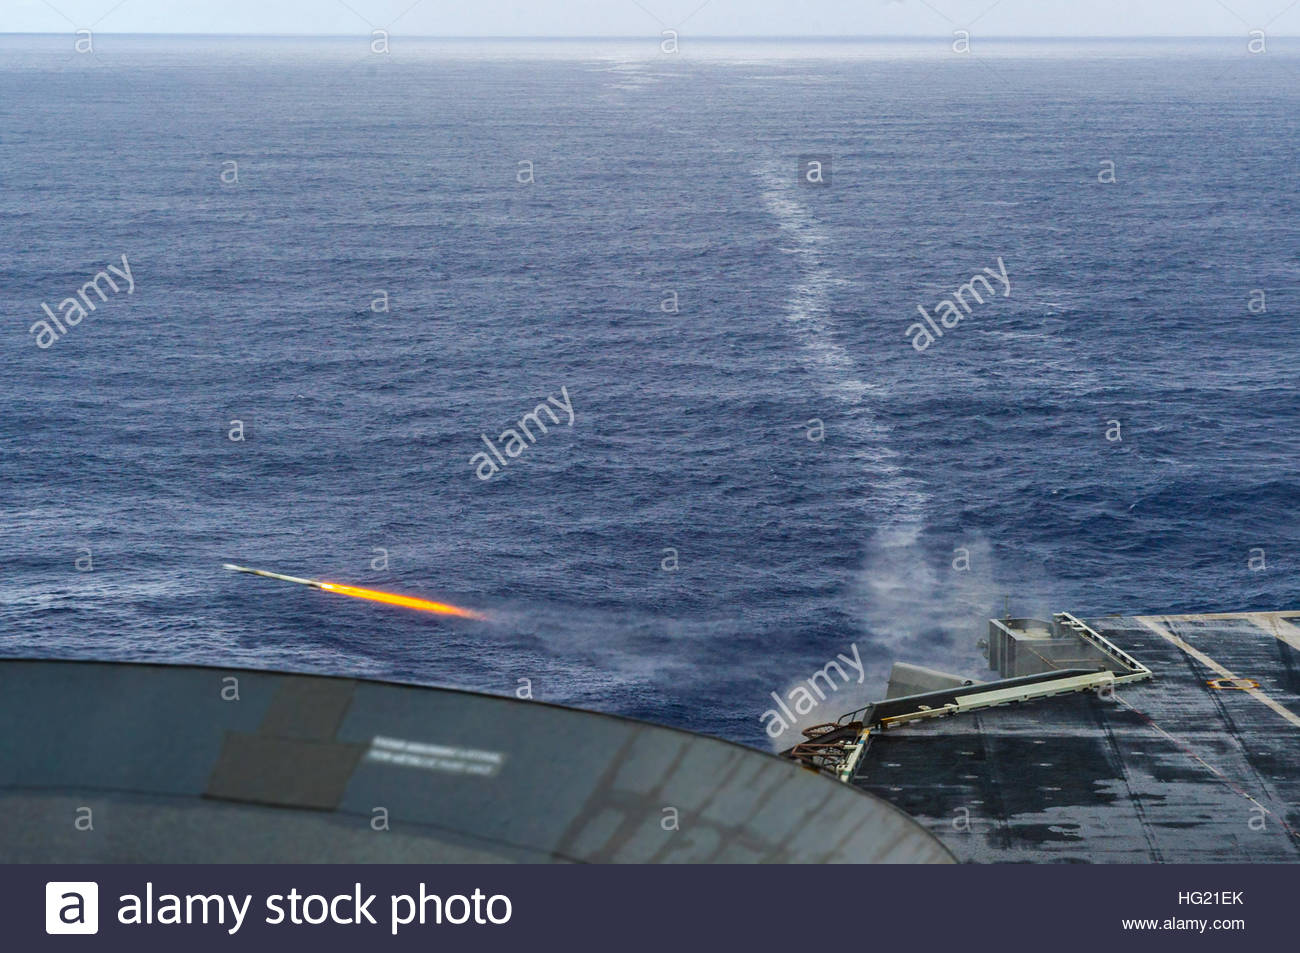 a-rim-116-rolling-airframe-missile-launches-from-the-aircraft-carrier-HG21EK.jpg